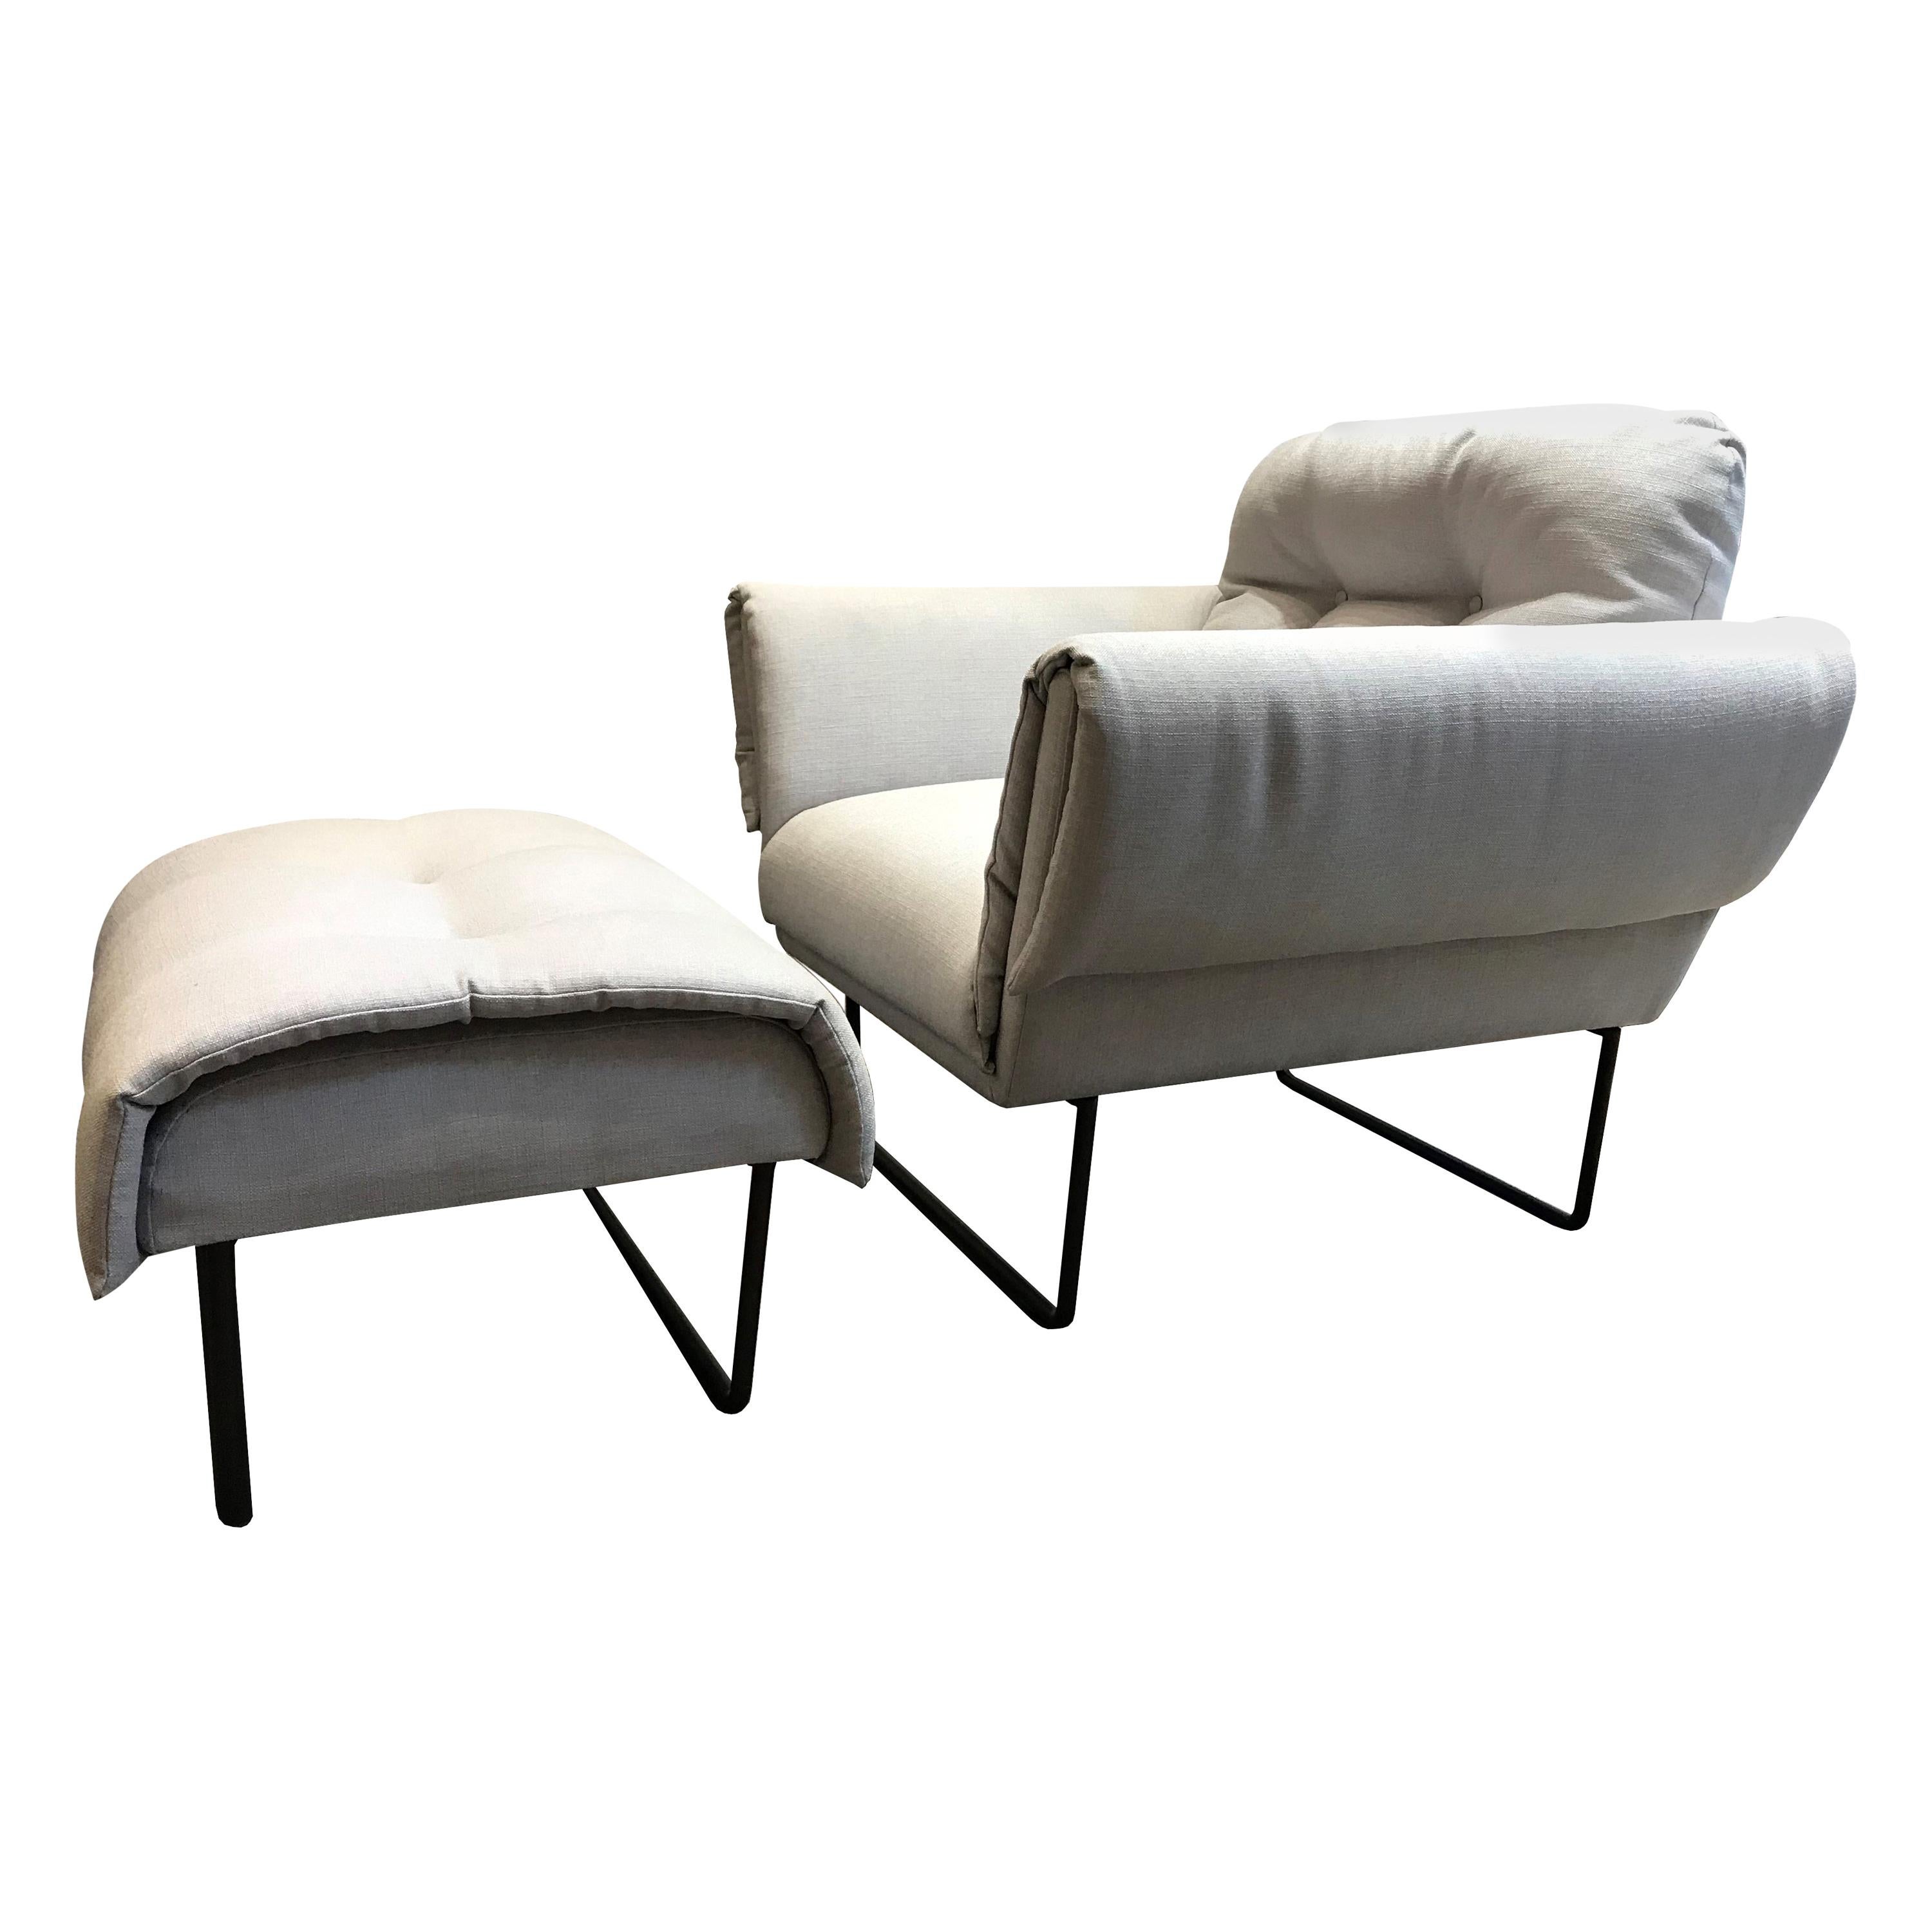 "Ro" Modernist Armchair with Ottoman in Upholstery and Painted Steel For Sale